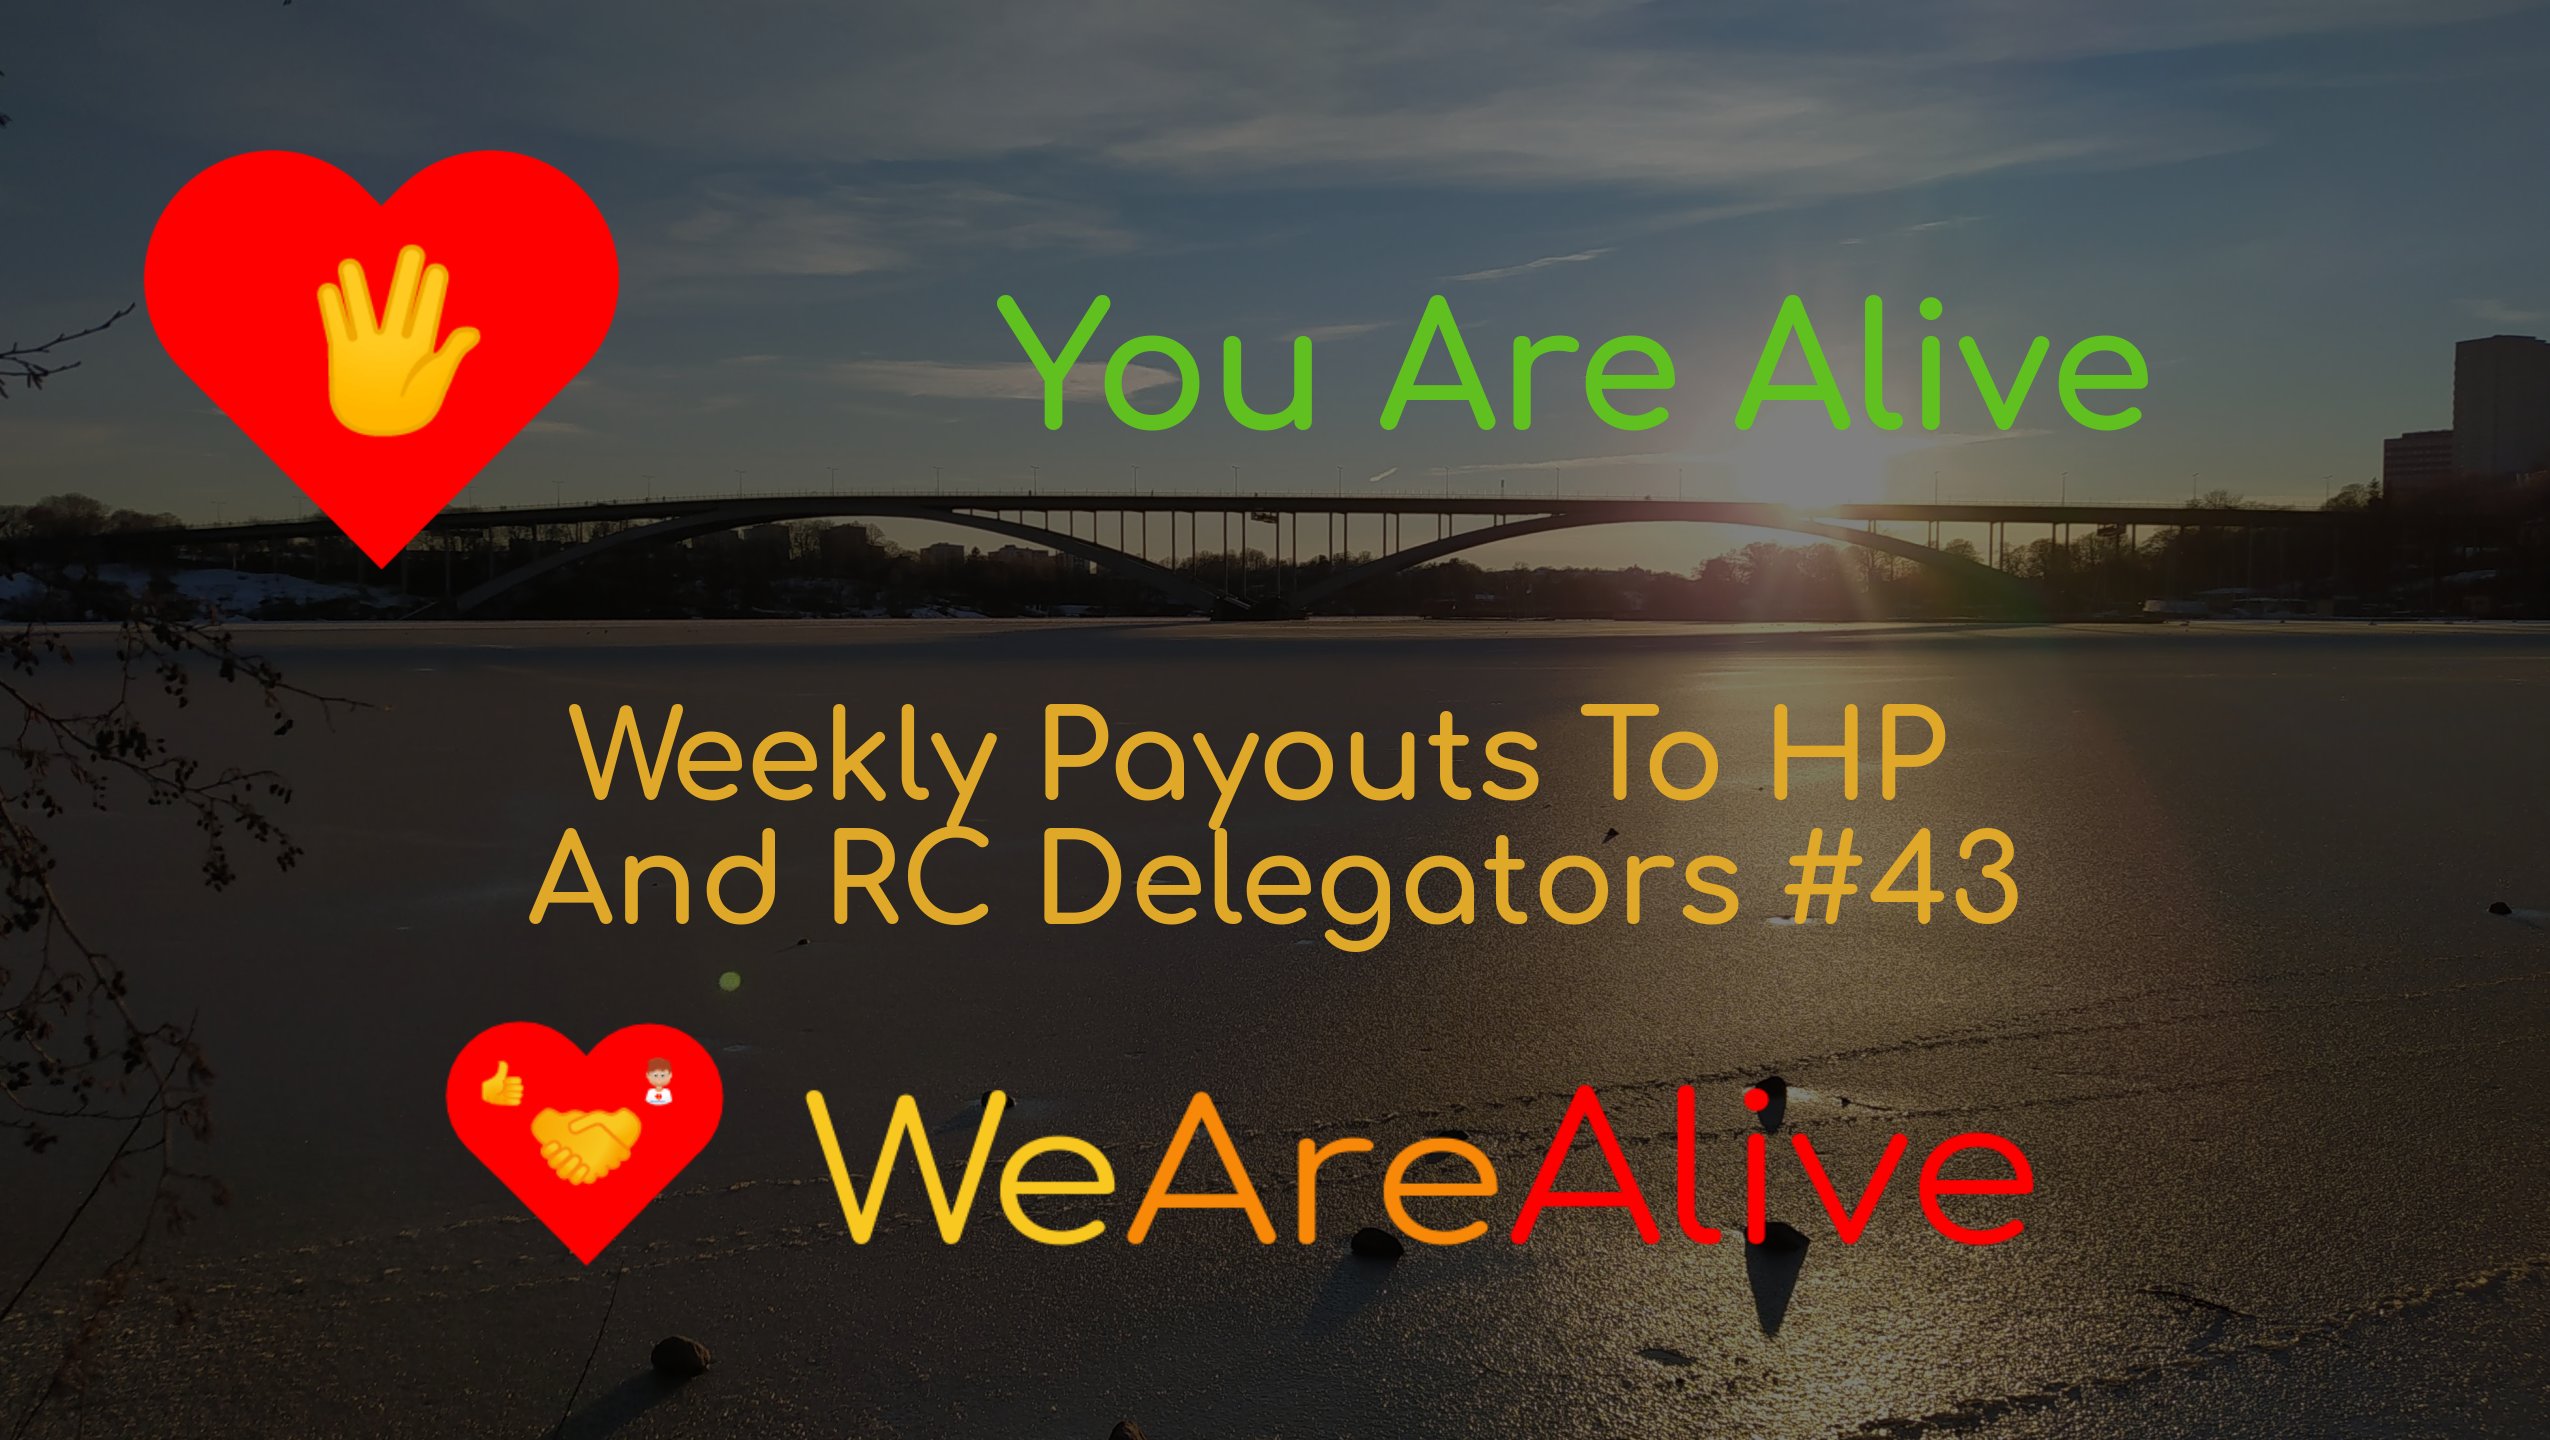 @youarealive/you-are-alive-weekly-payouts-to-hp-and-rc-delegators-43